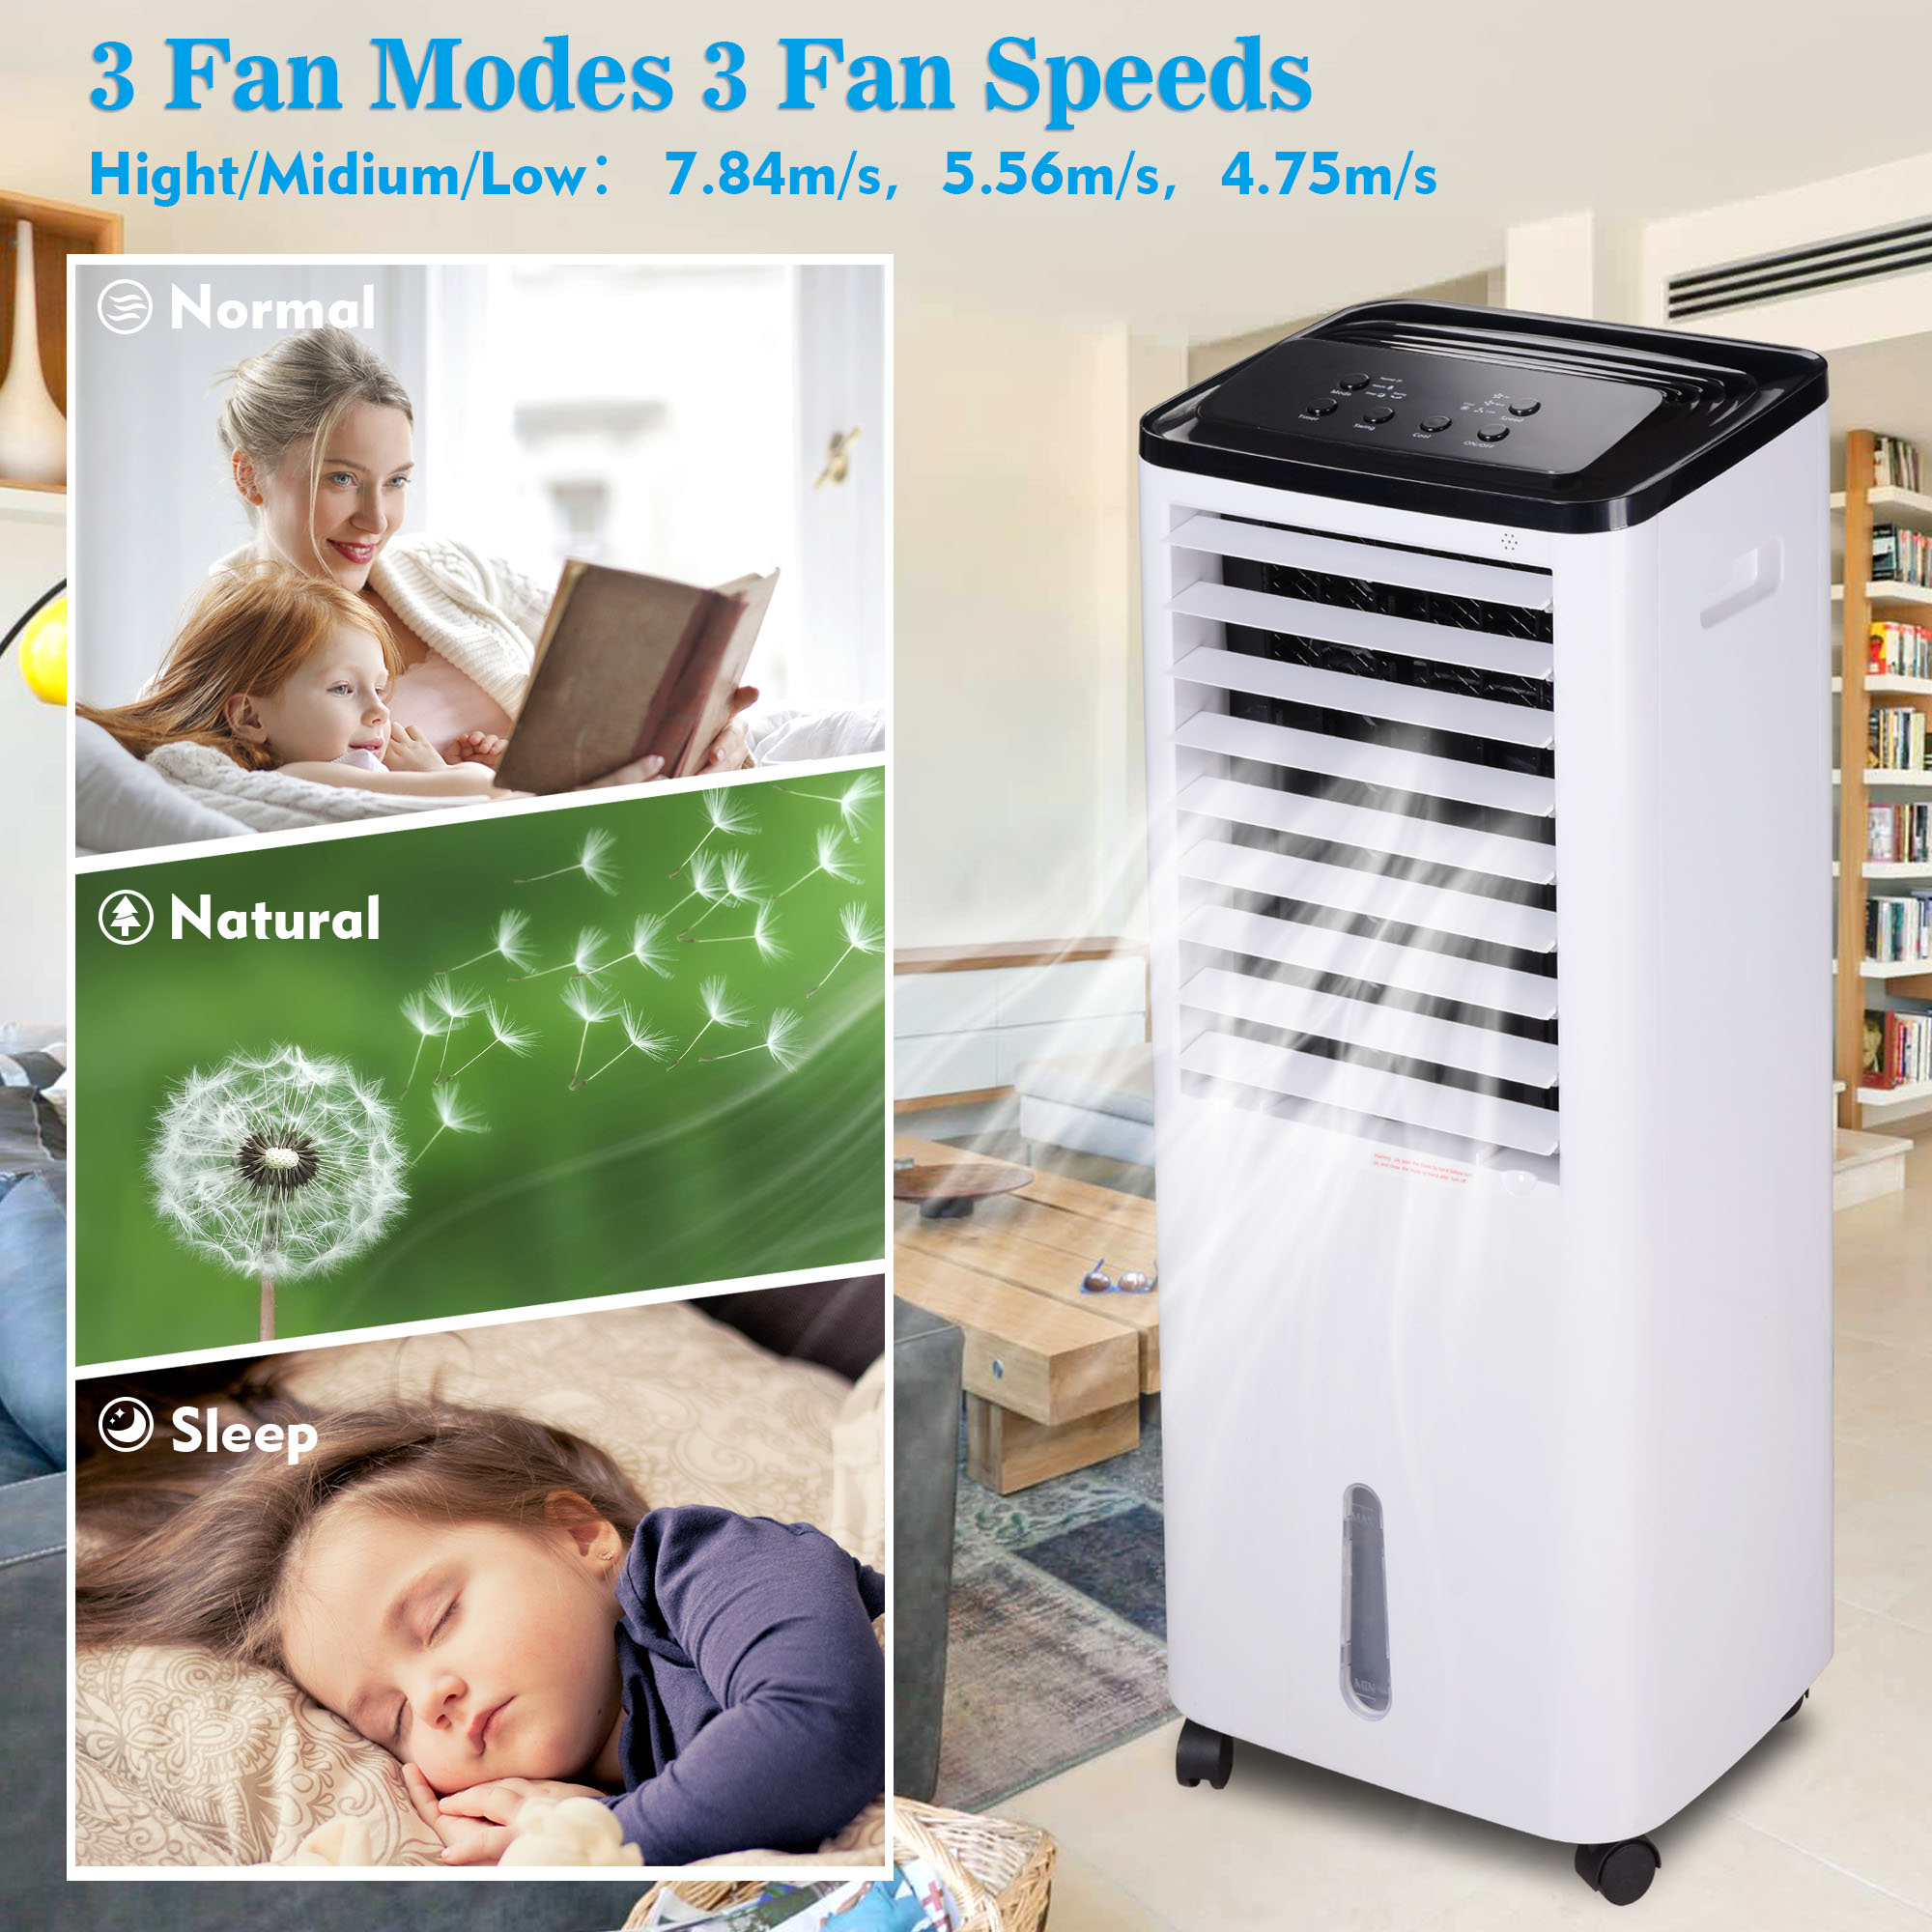 Yescom Evaporative Cooler Portable Air Cooler Humidifier with Remote Control Ice Pack Energy Saving Indoor Outdoor 200W